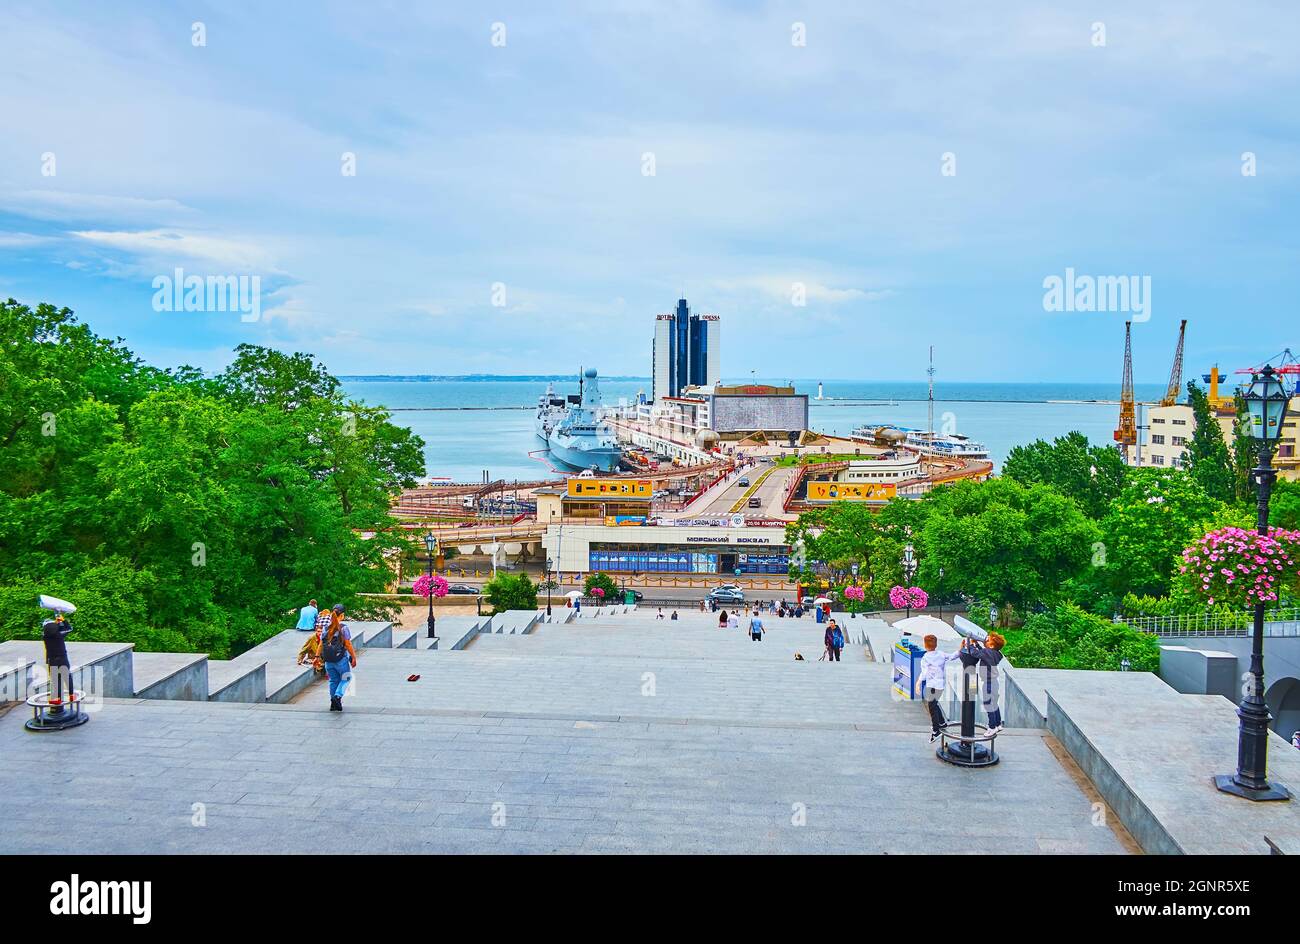 ODESSA, UKRAINE - June 18, 2021: The view of the Black Sea coast and Odessa Sea Port from the top of historic Potemkin Stairs, on June 18 in Odessa Stock Photo